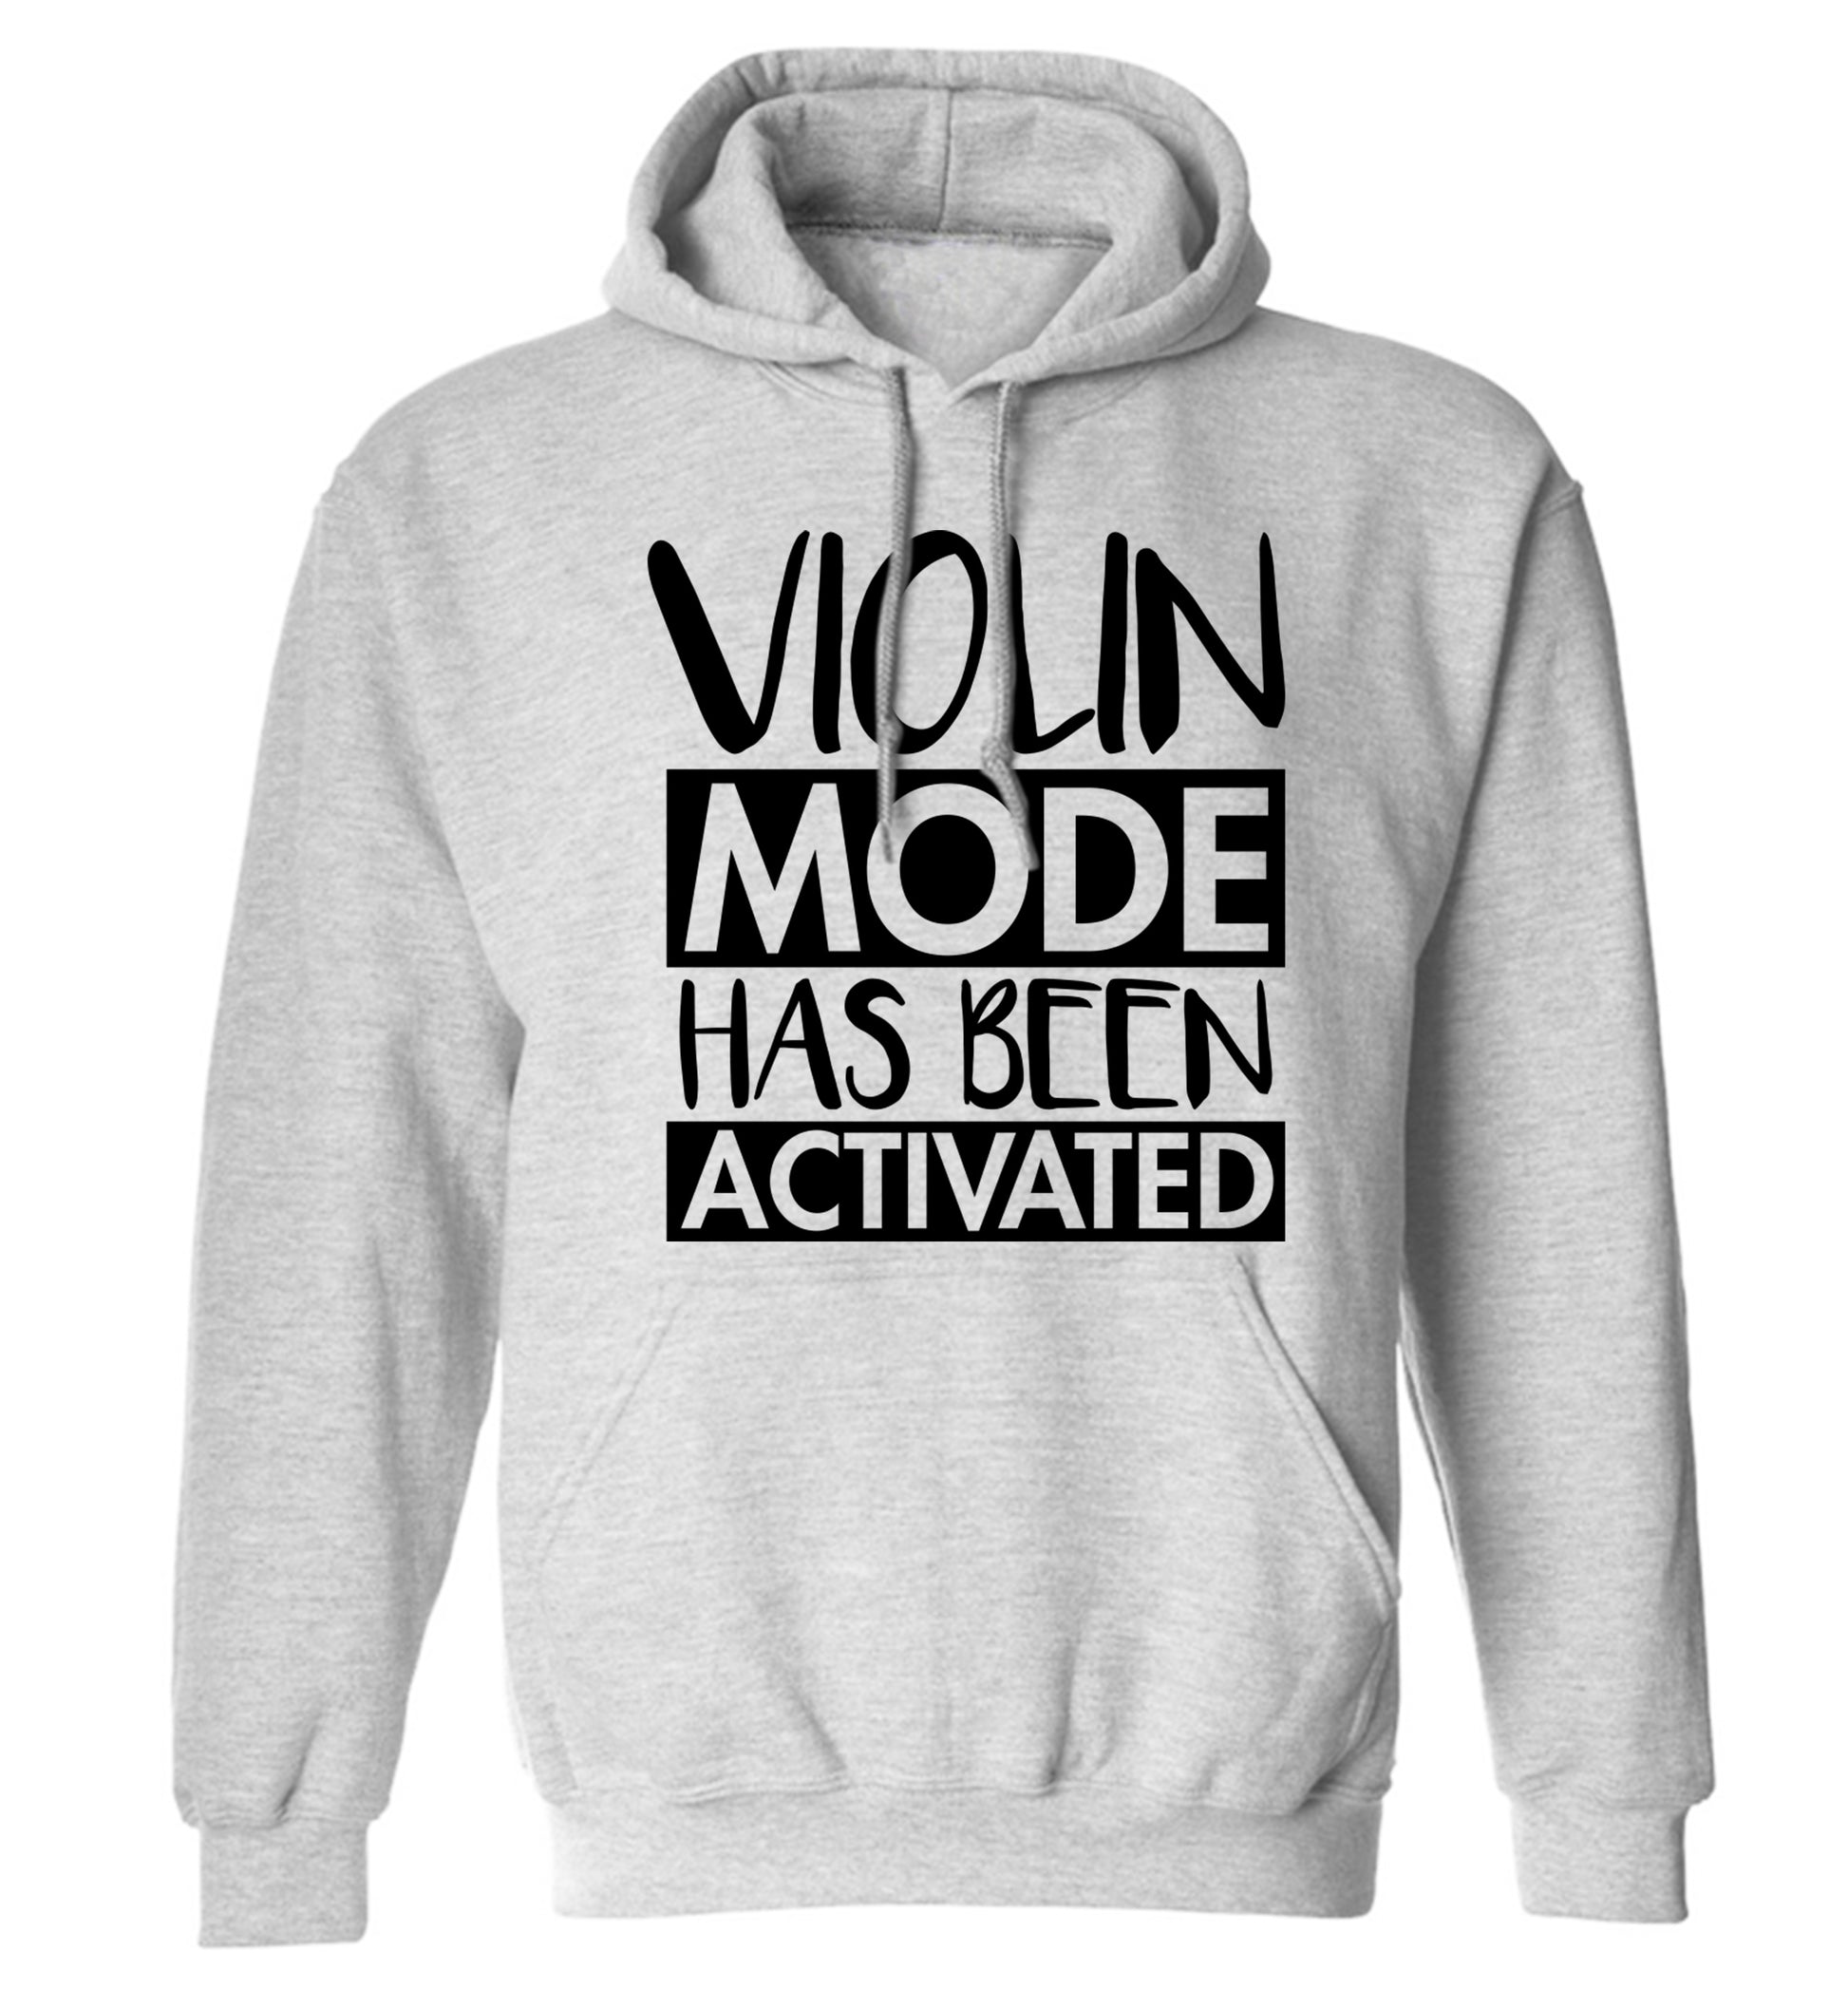 Violin Mode Activated adults unisex grey hoodie 2XL